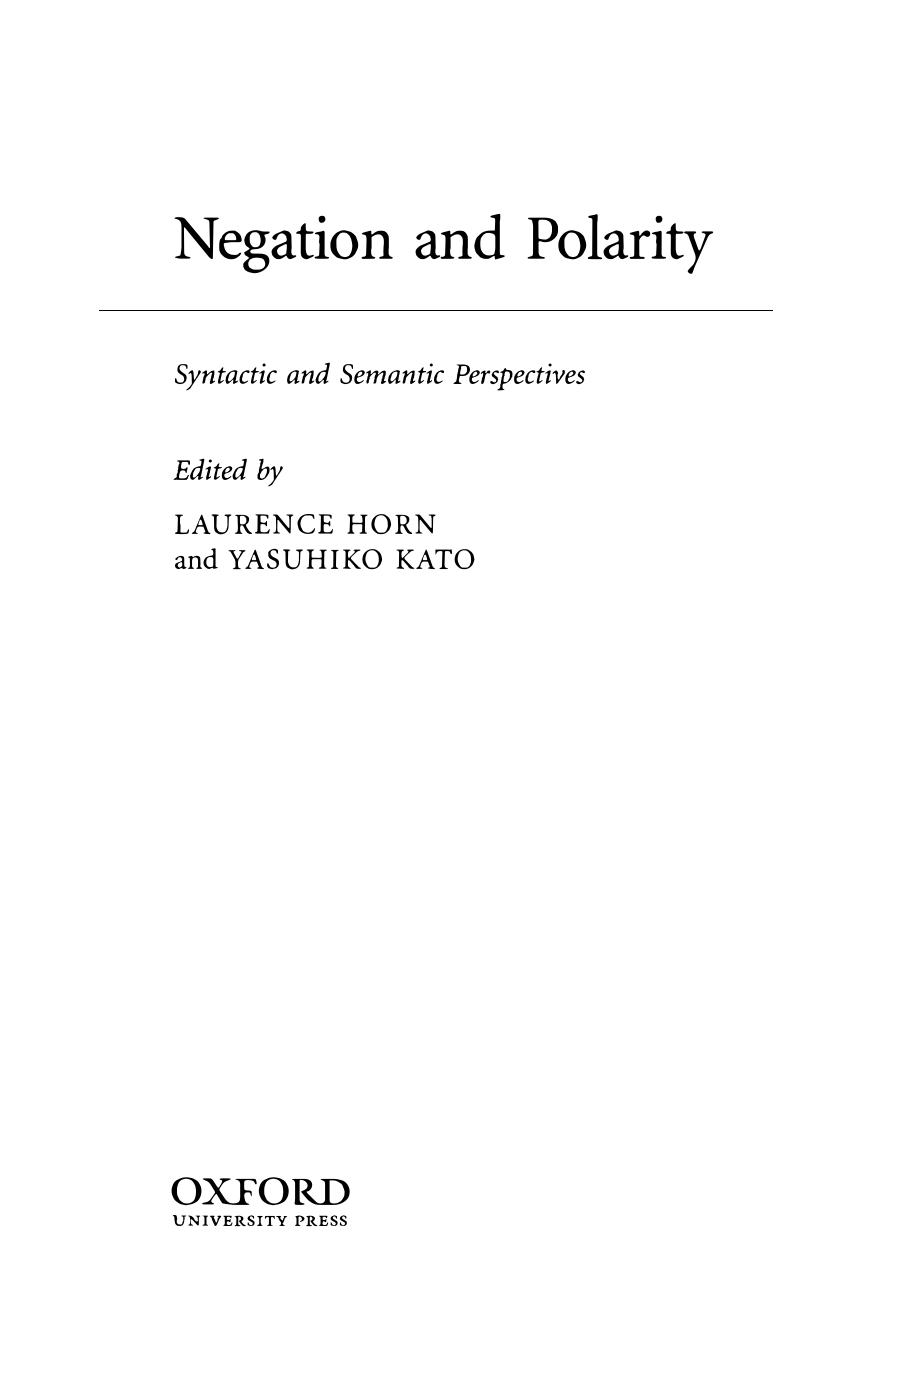 Negation and Polarity Syntactic and Symantic Perspectives (Laurence R. Horn, Yasuhiko Kato)